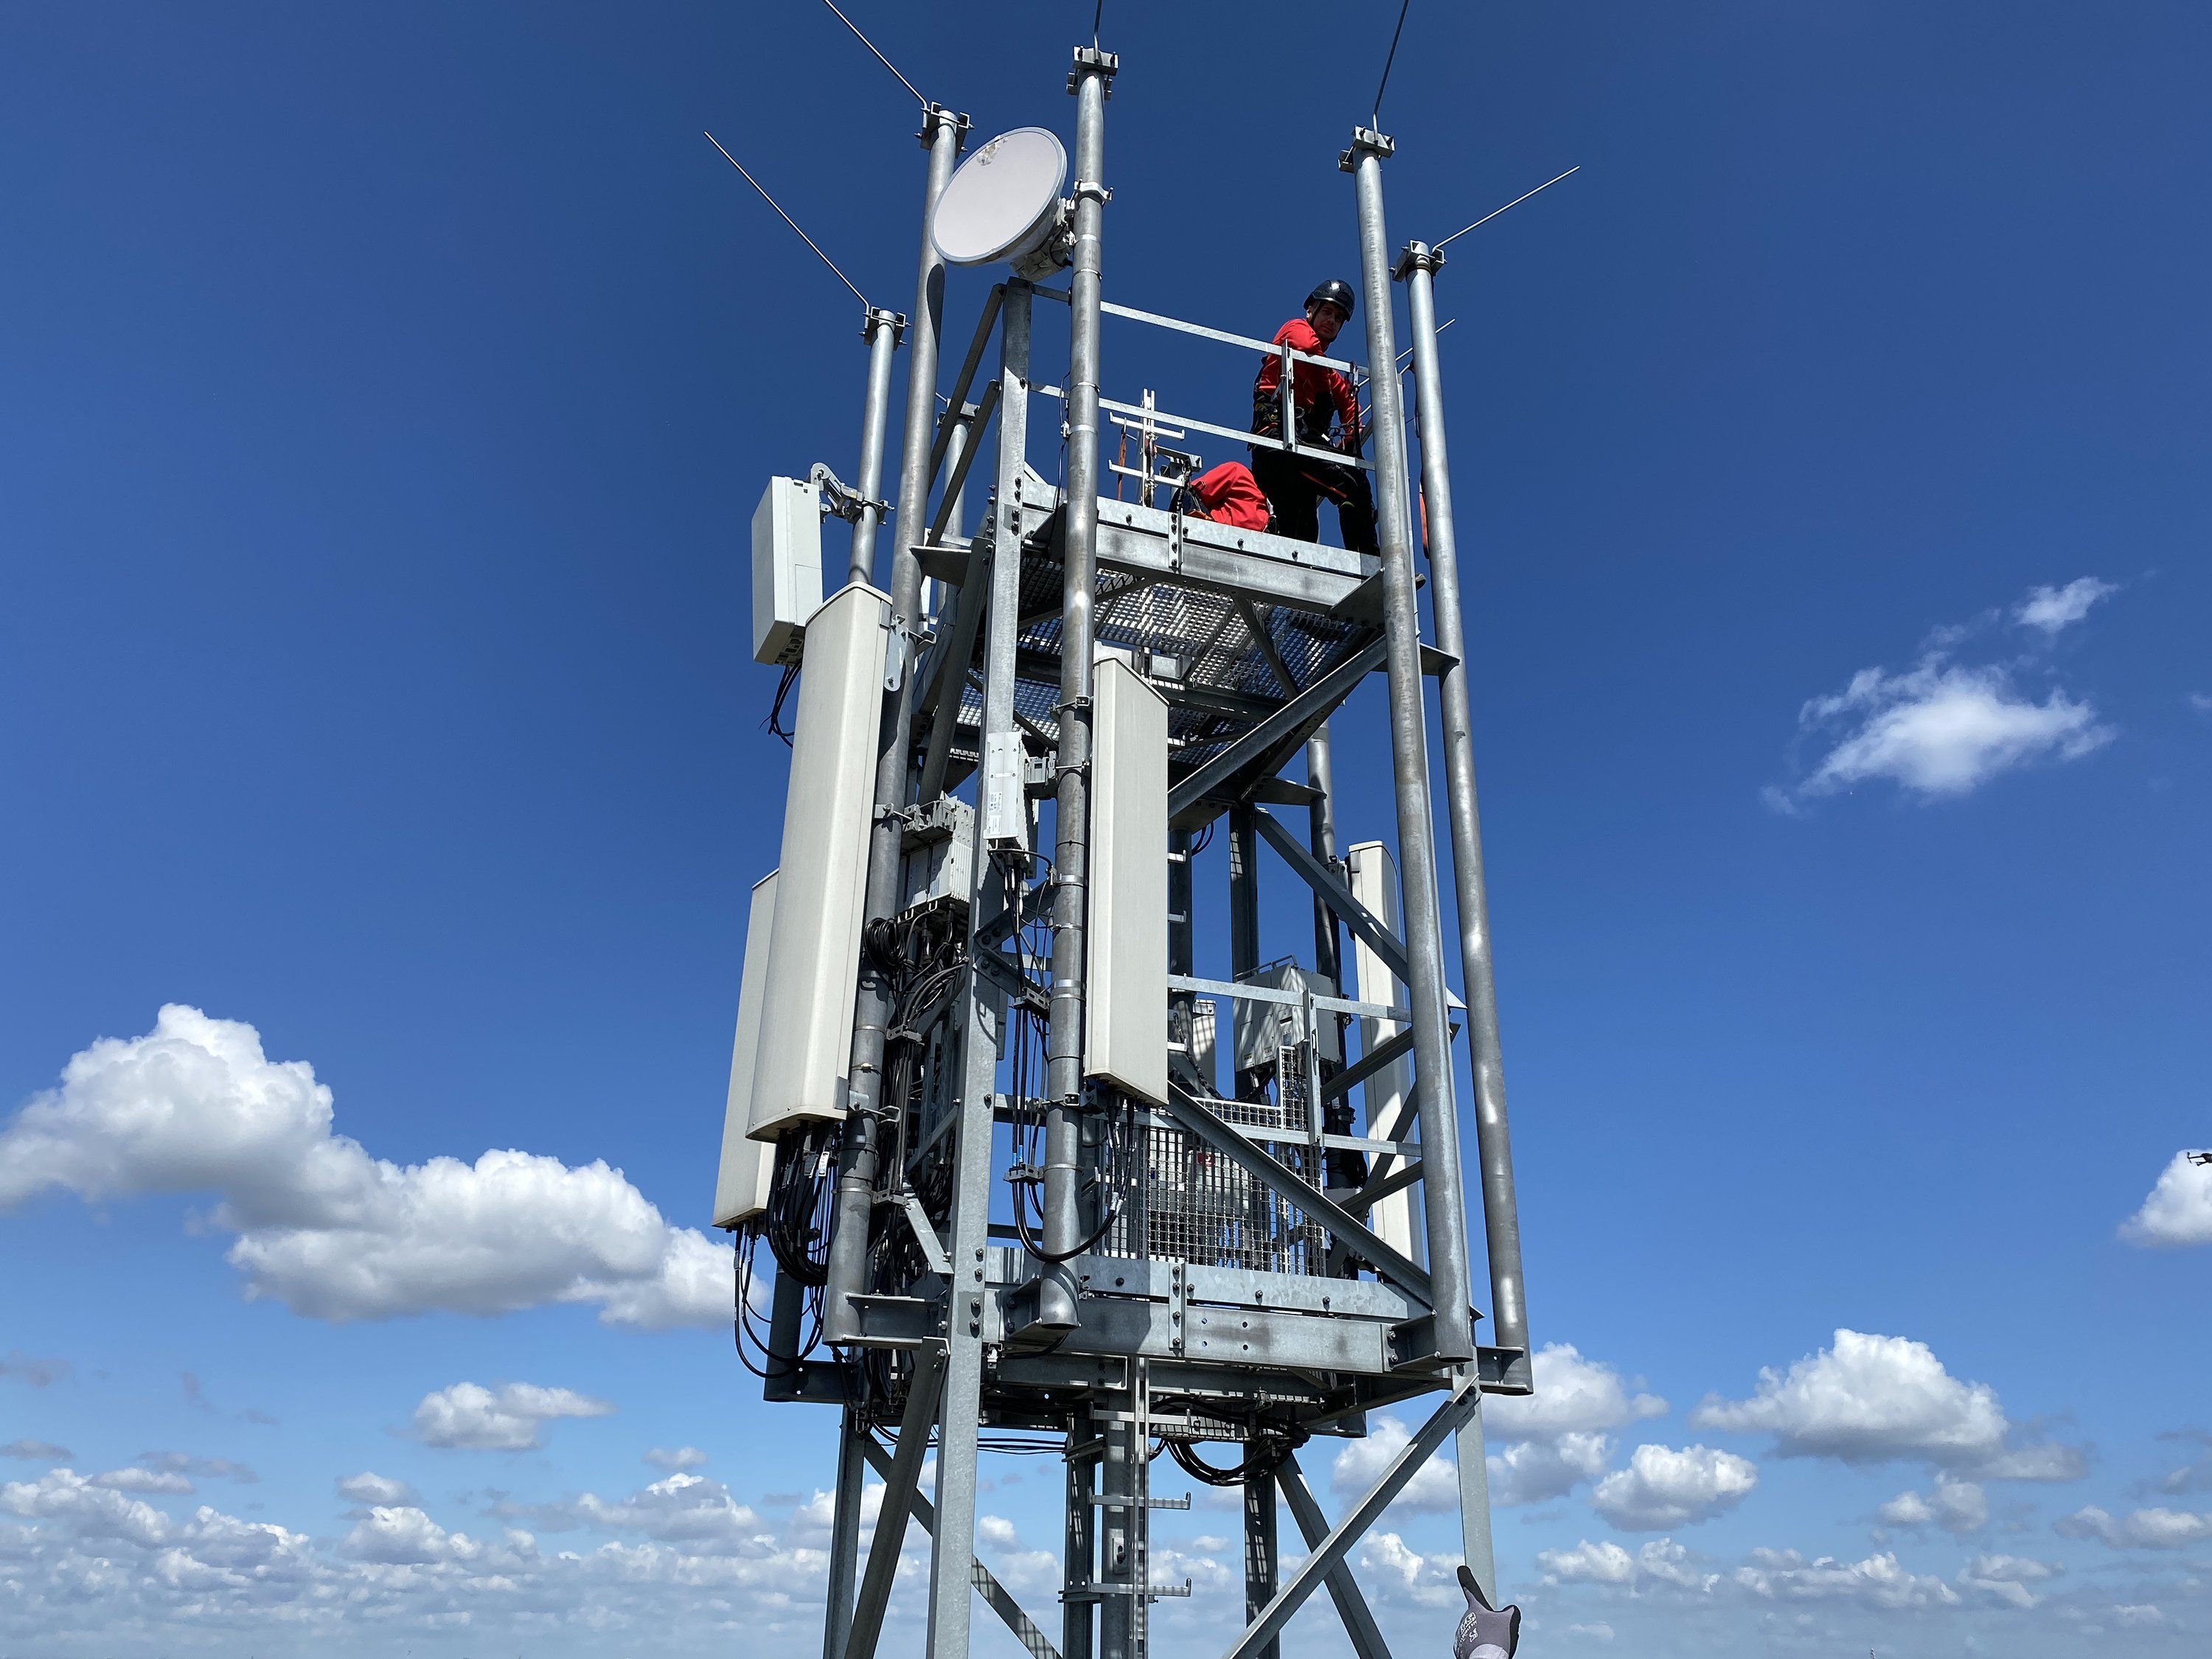 Two helmeted people stand at the top of a communications tower with 5G massive MIMO multi-antenna systems. A bright blue sky with clouds is behind them.